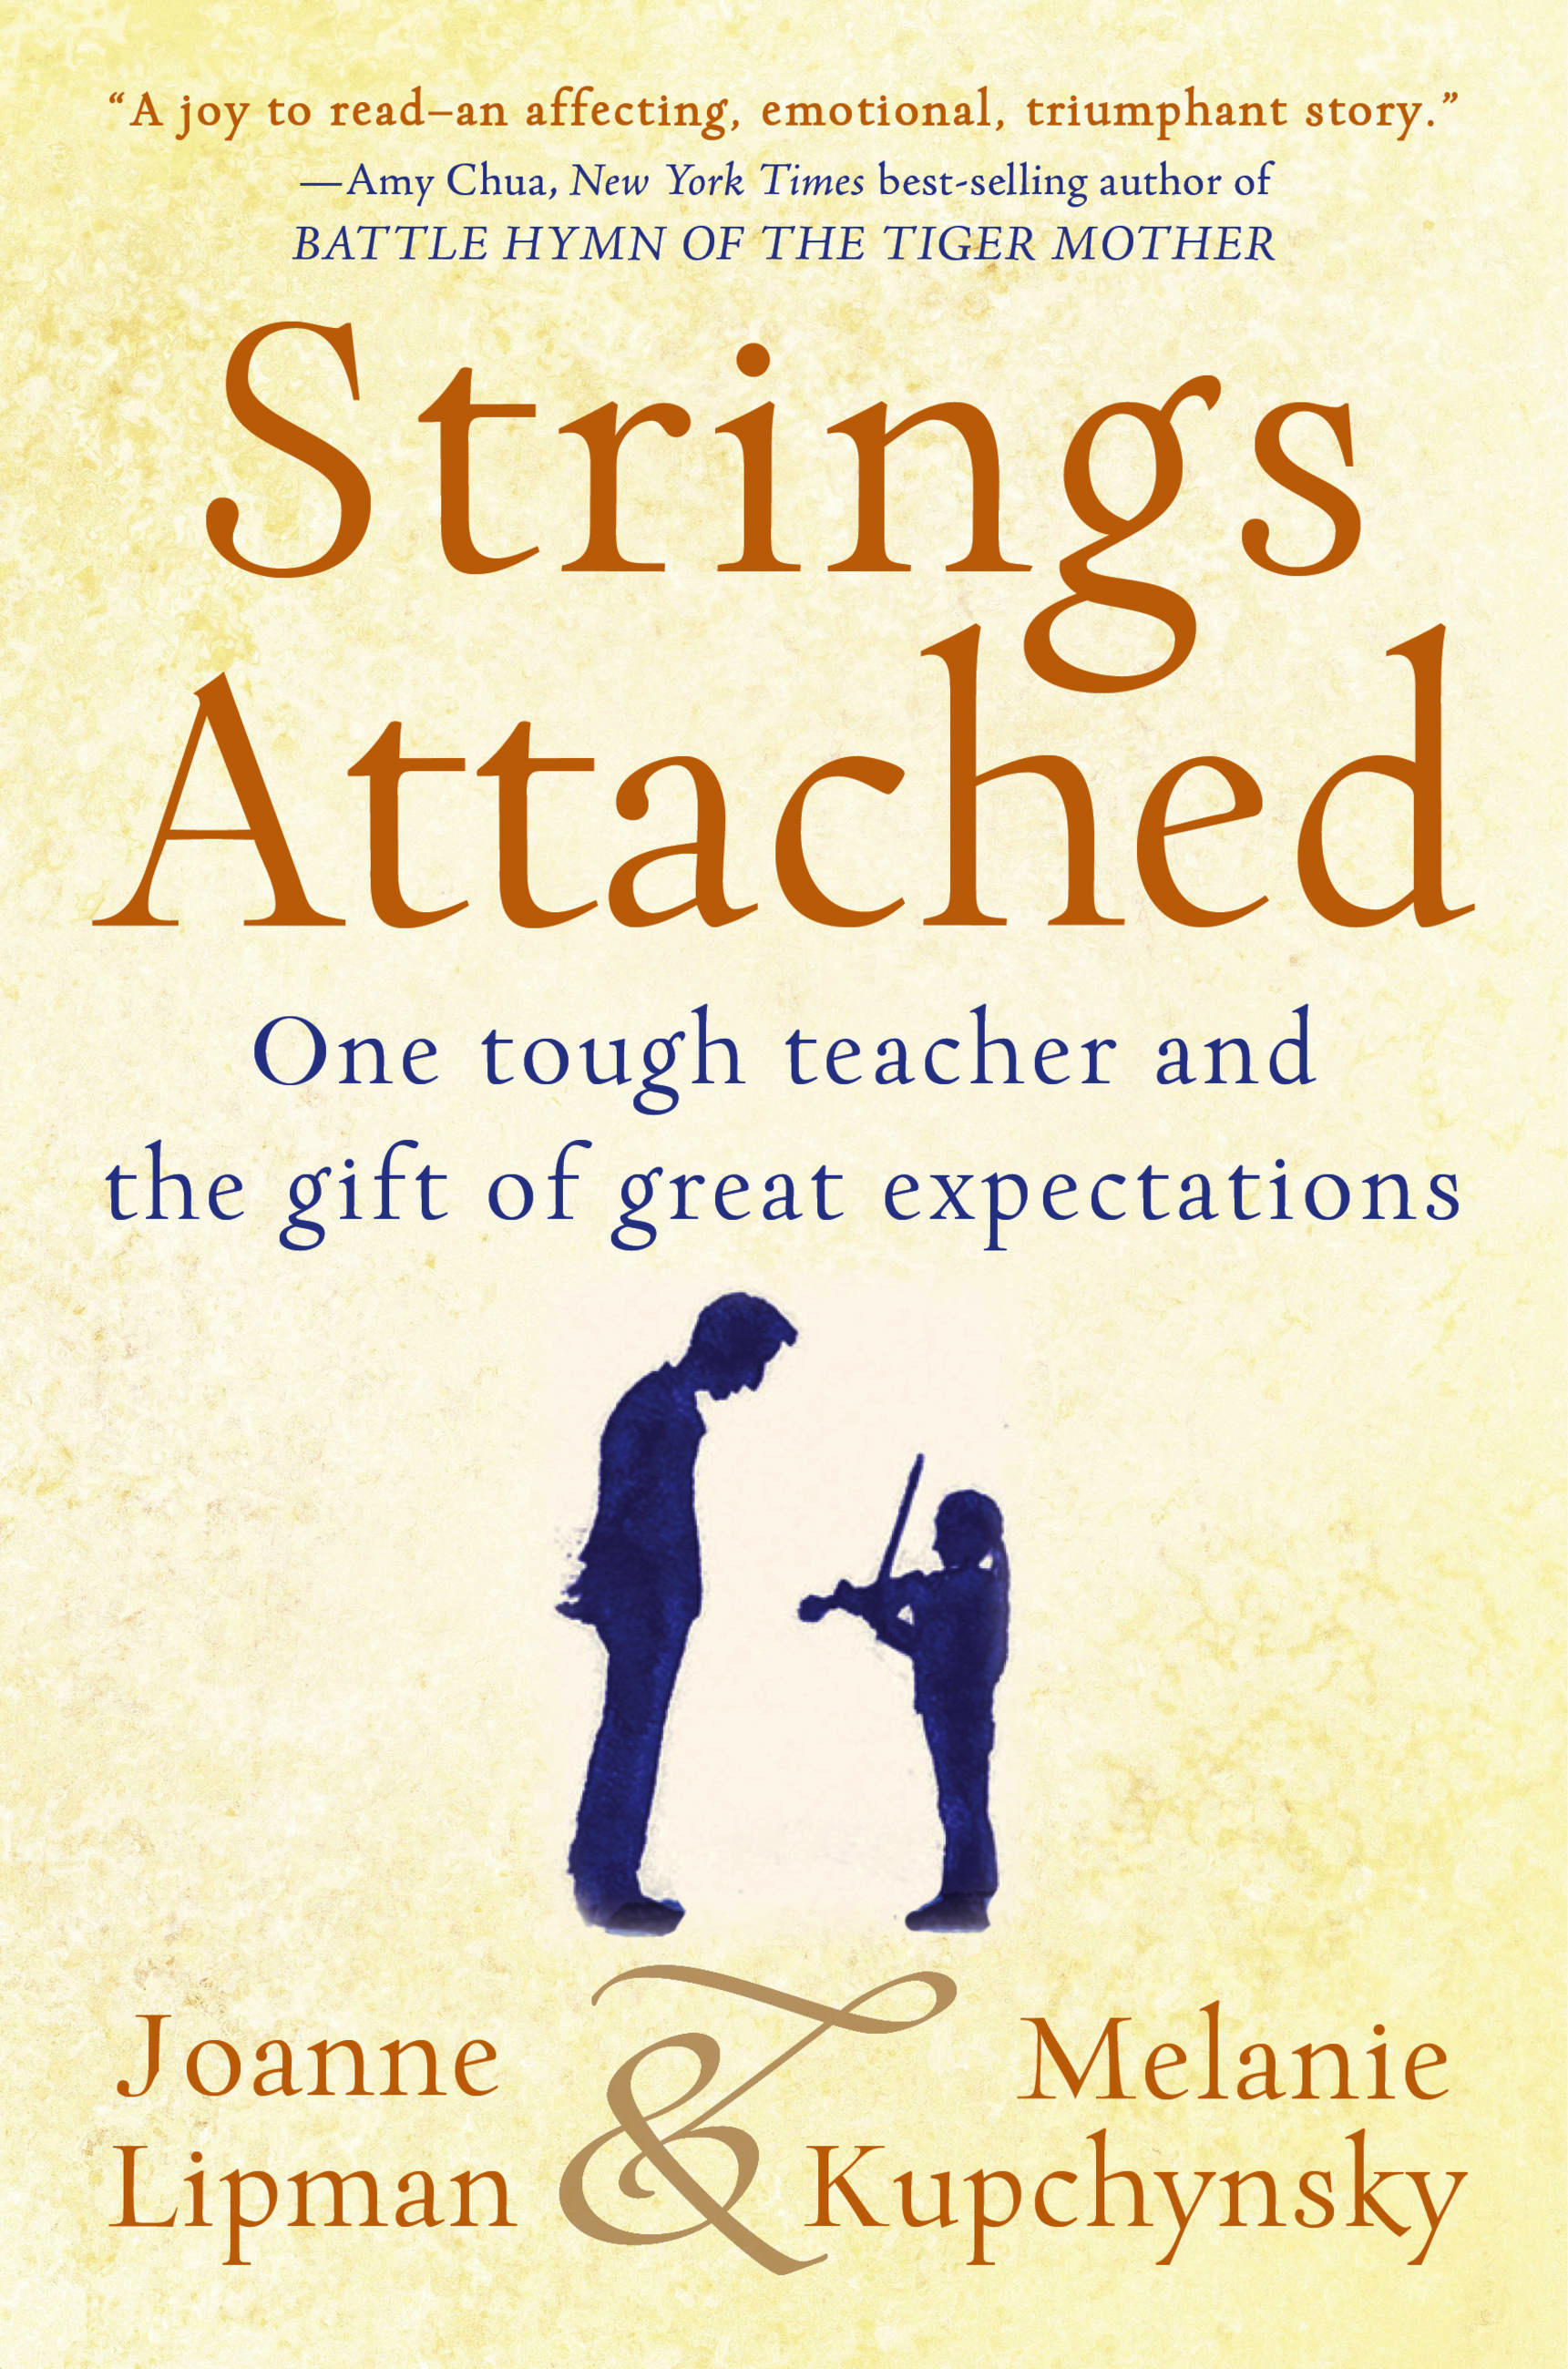 Lipman　Group　Hachette　by　Strings　Joanne　Attached　Book